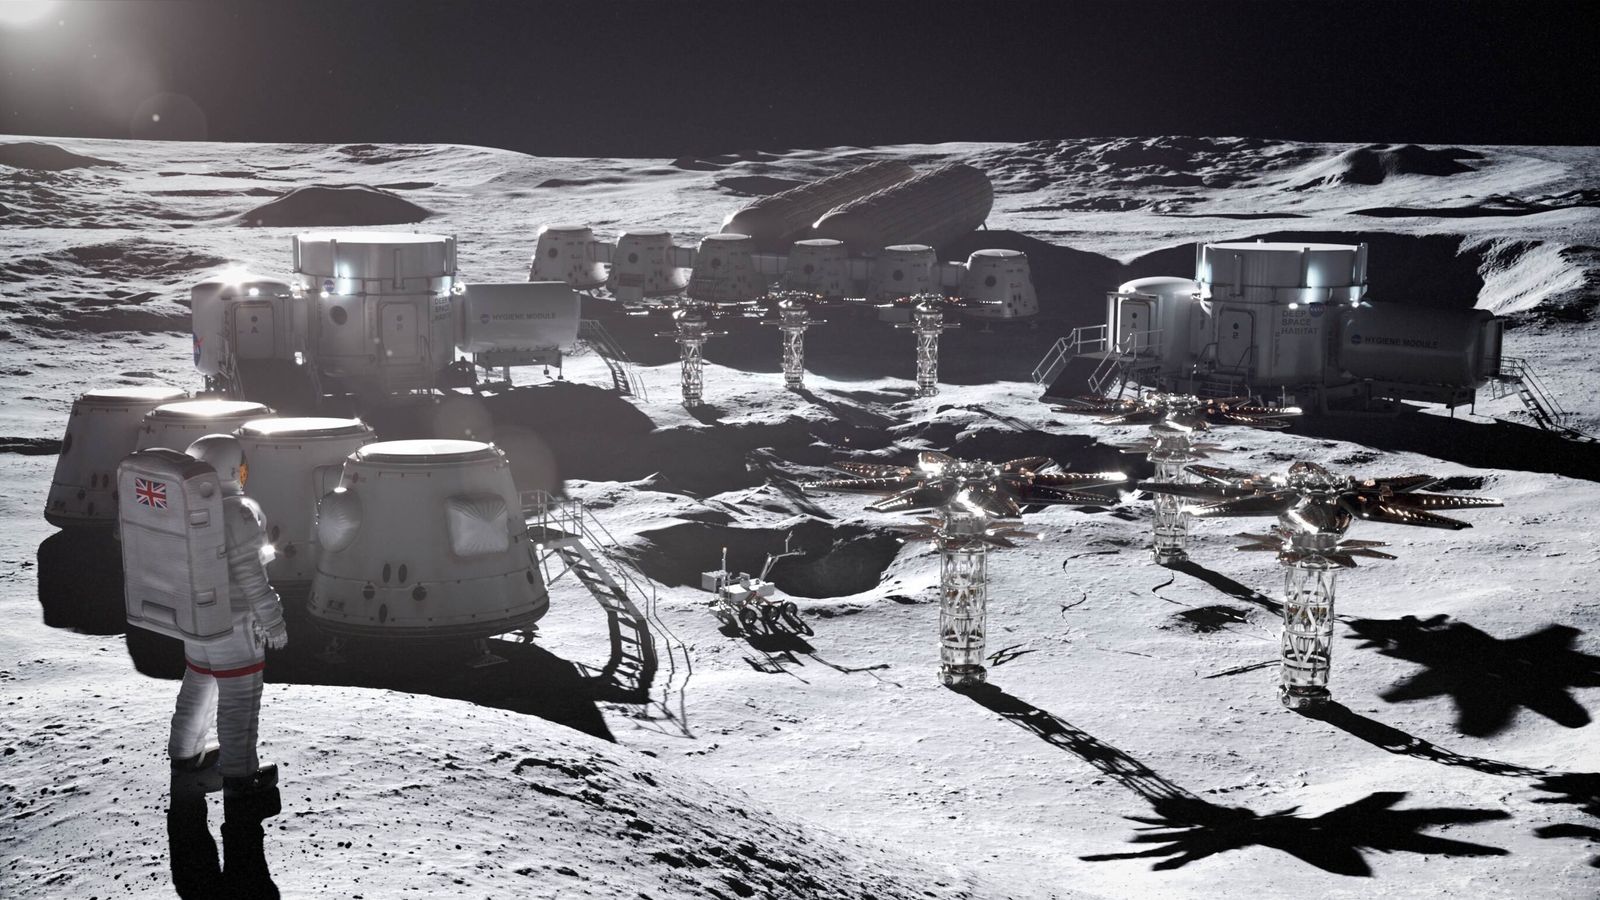 Rolls-Royce gets funding for moon base nuclear reactor